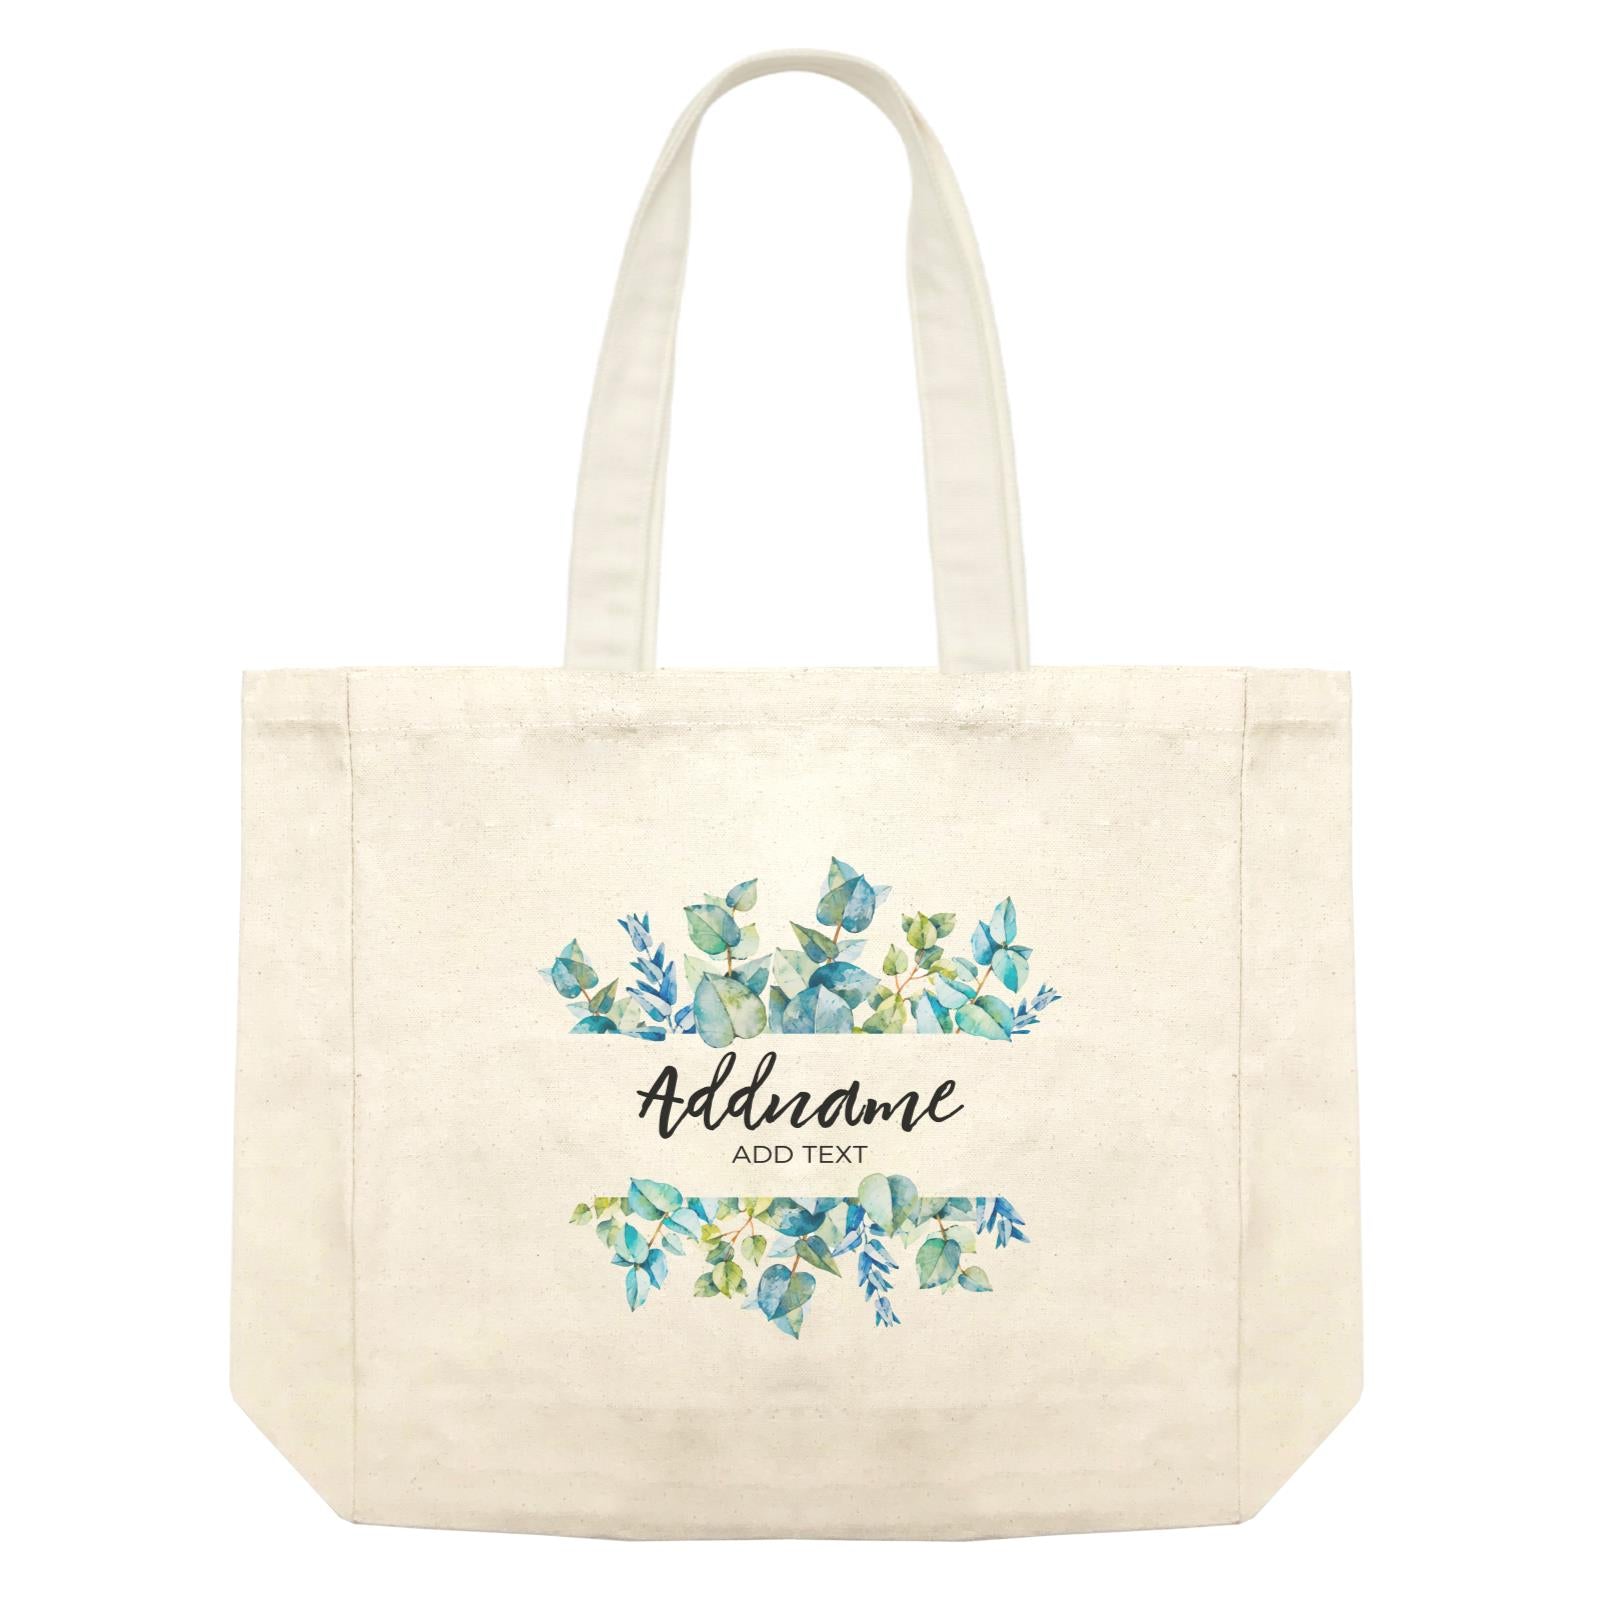 Add Your Own Text Teacher Blue Leaves Box Addname And Add Text Shopping Bag